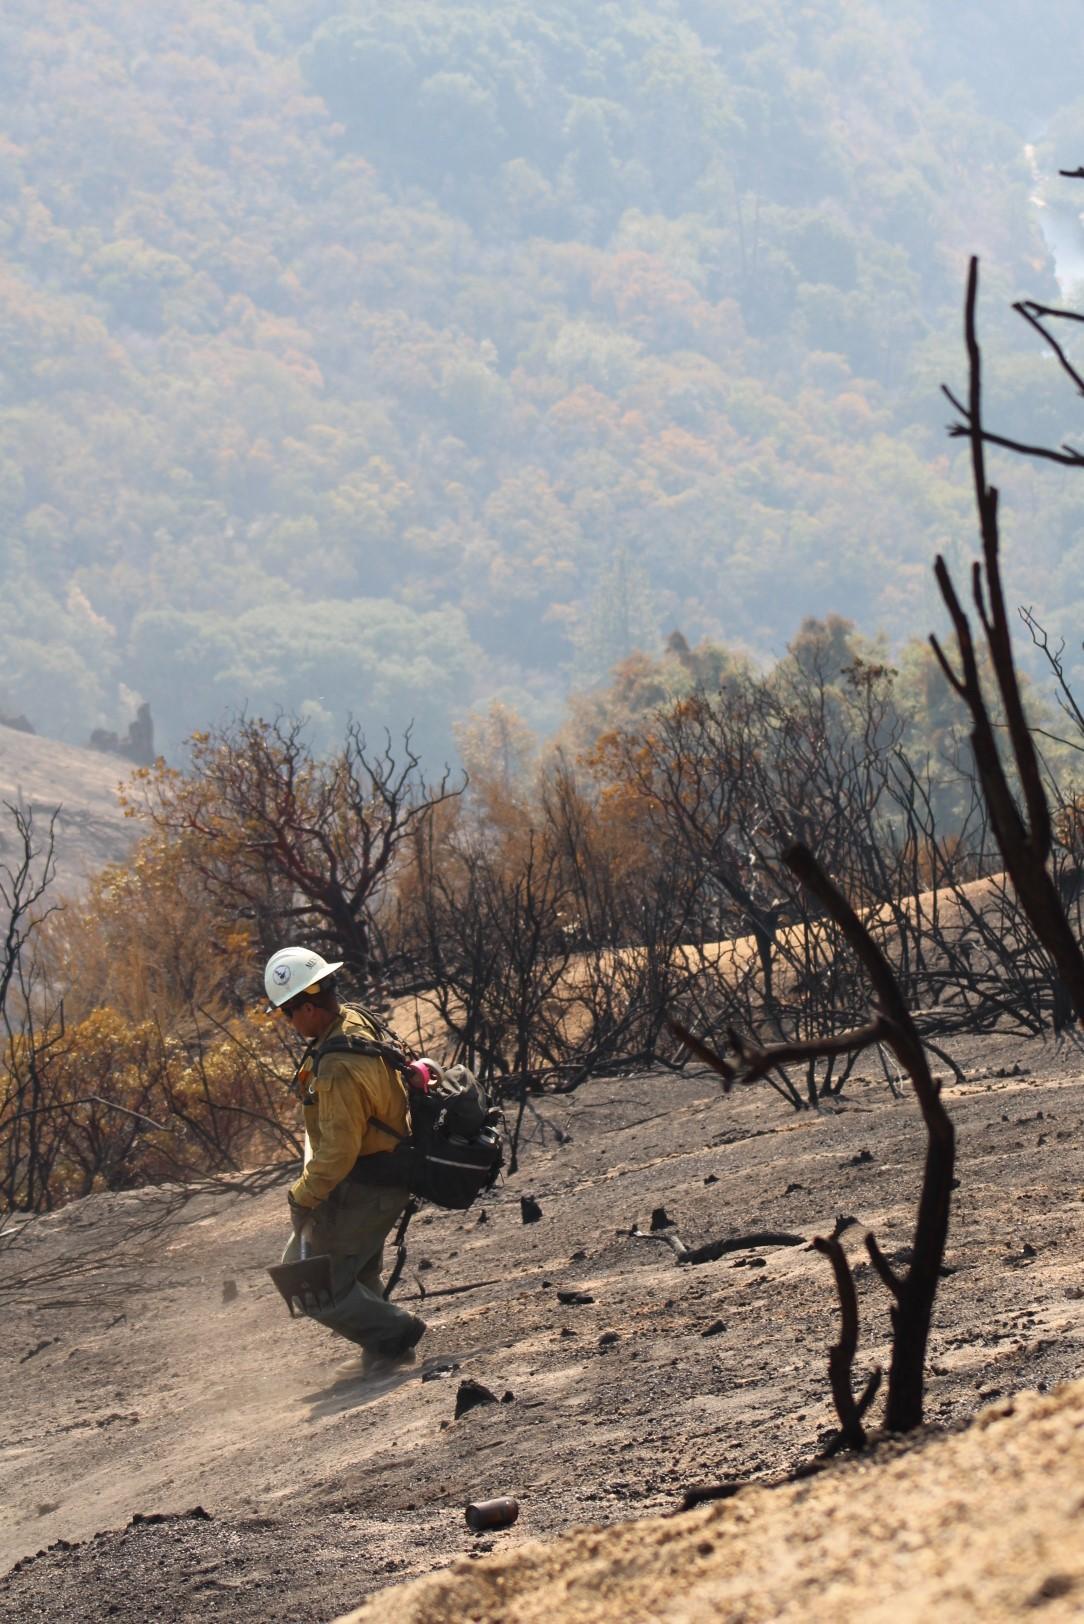 A firefighter walks down a steep ash-covered hill holding a tool, surrounded by burned plants